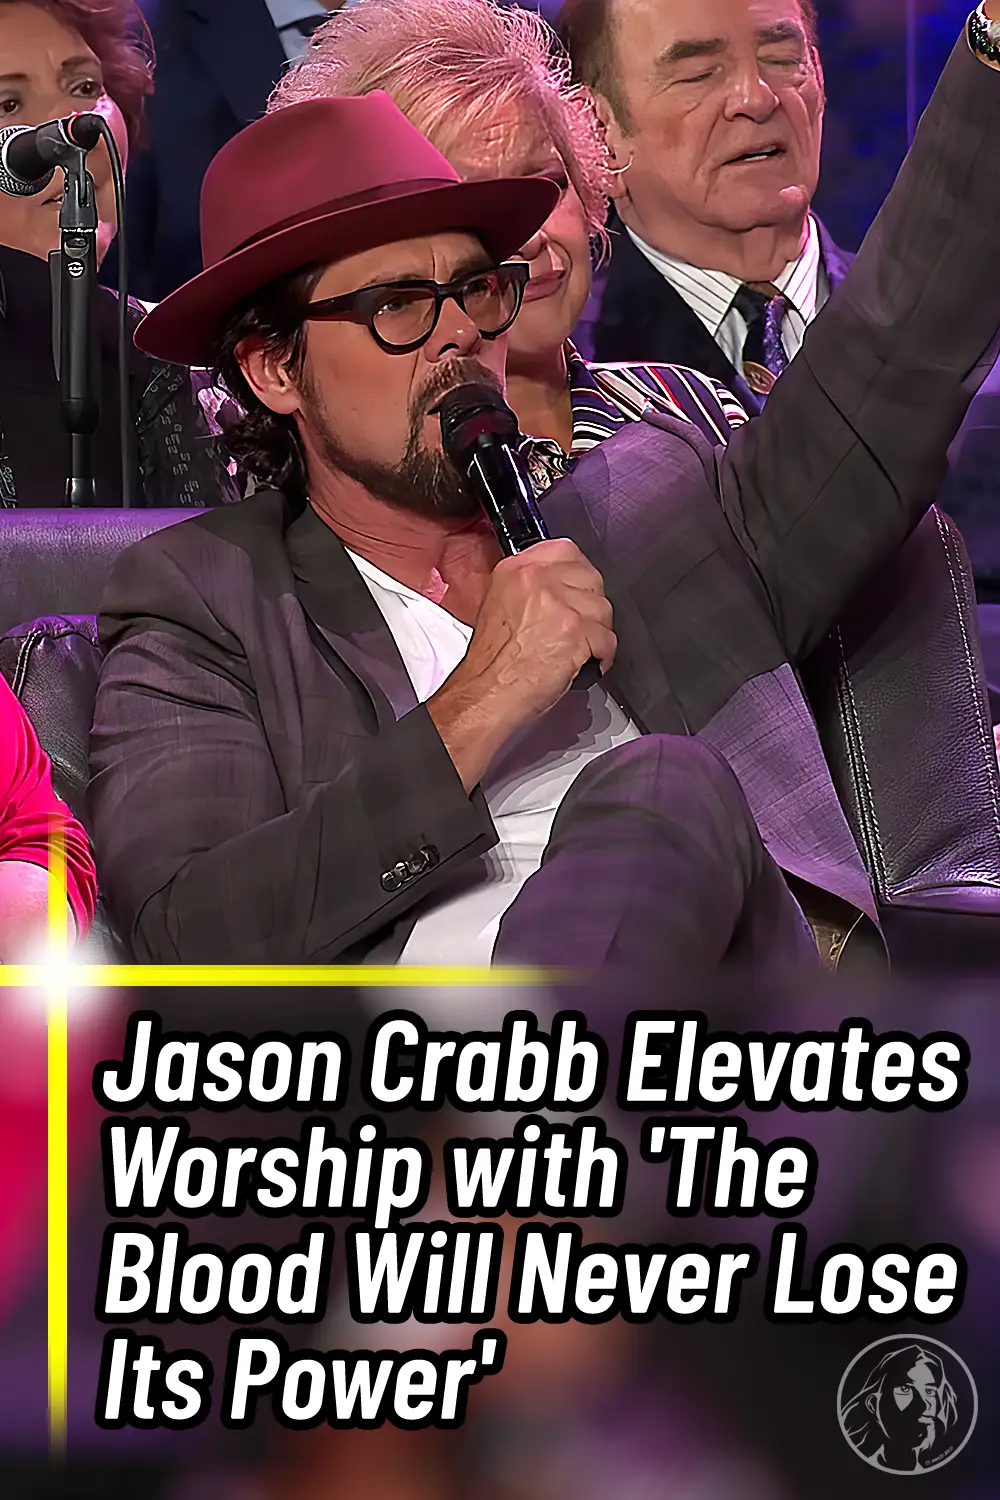 Jason Crabb Elevates Worship with \'The Blood Will Never Lose Its Power\'